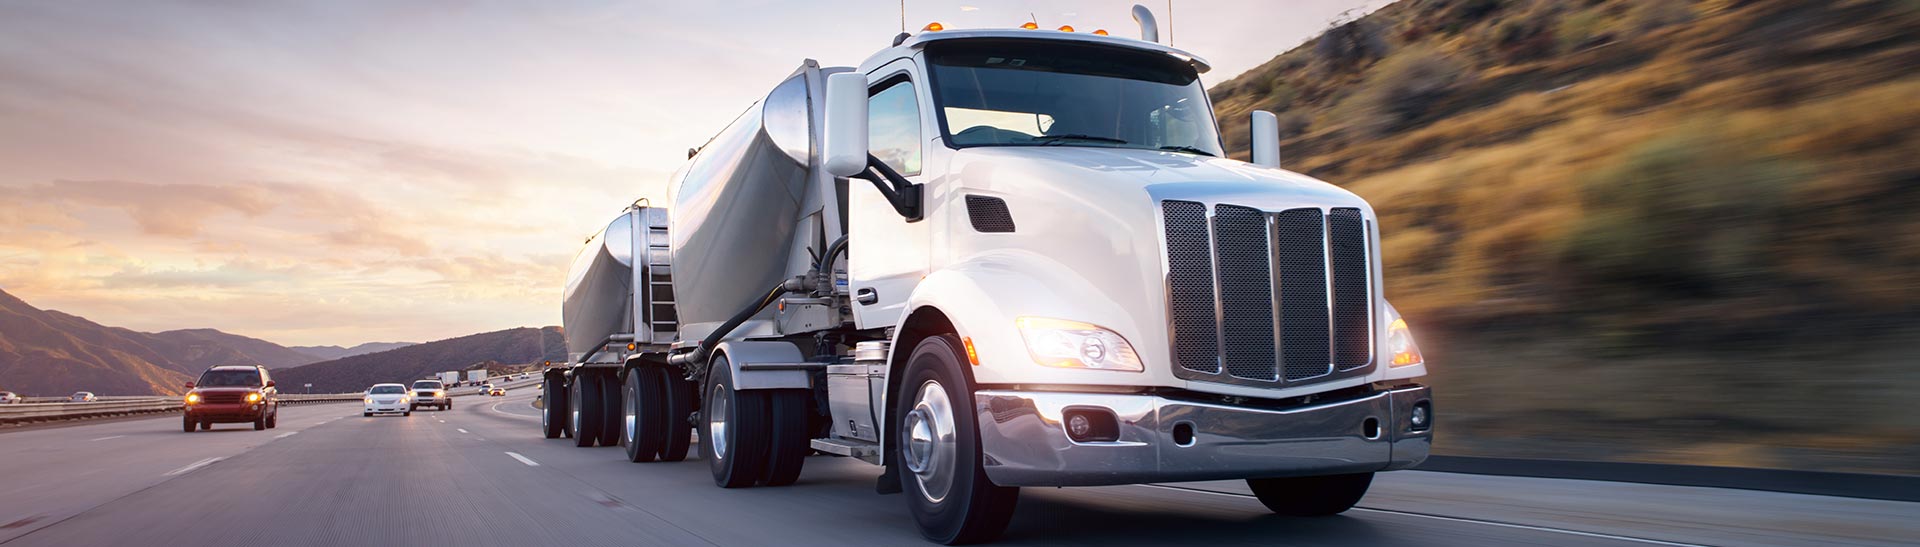 Chicago Trucking Company, Trucking Services and Intermodal Trucking